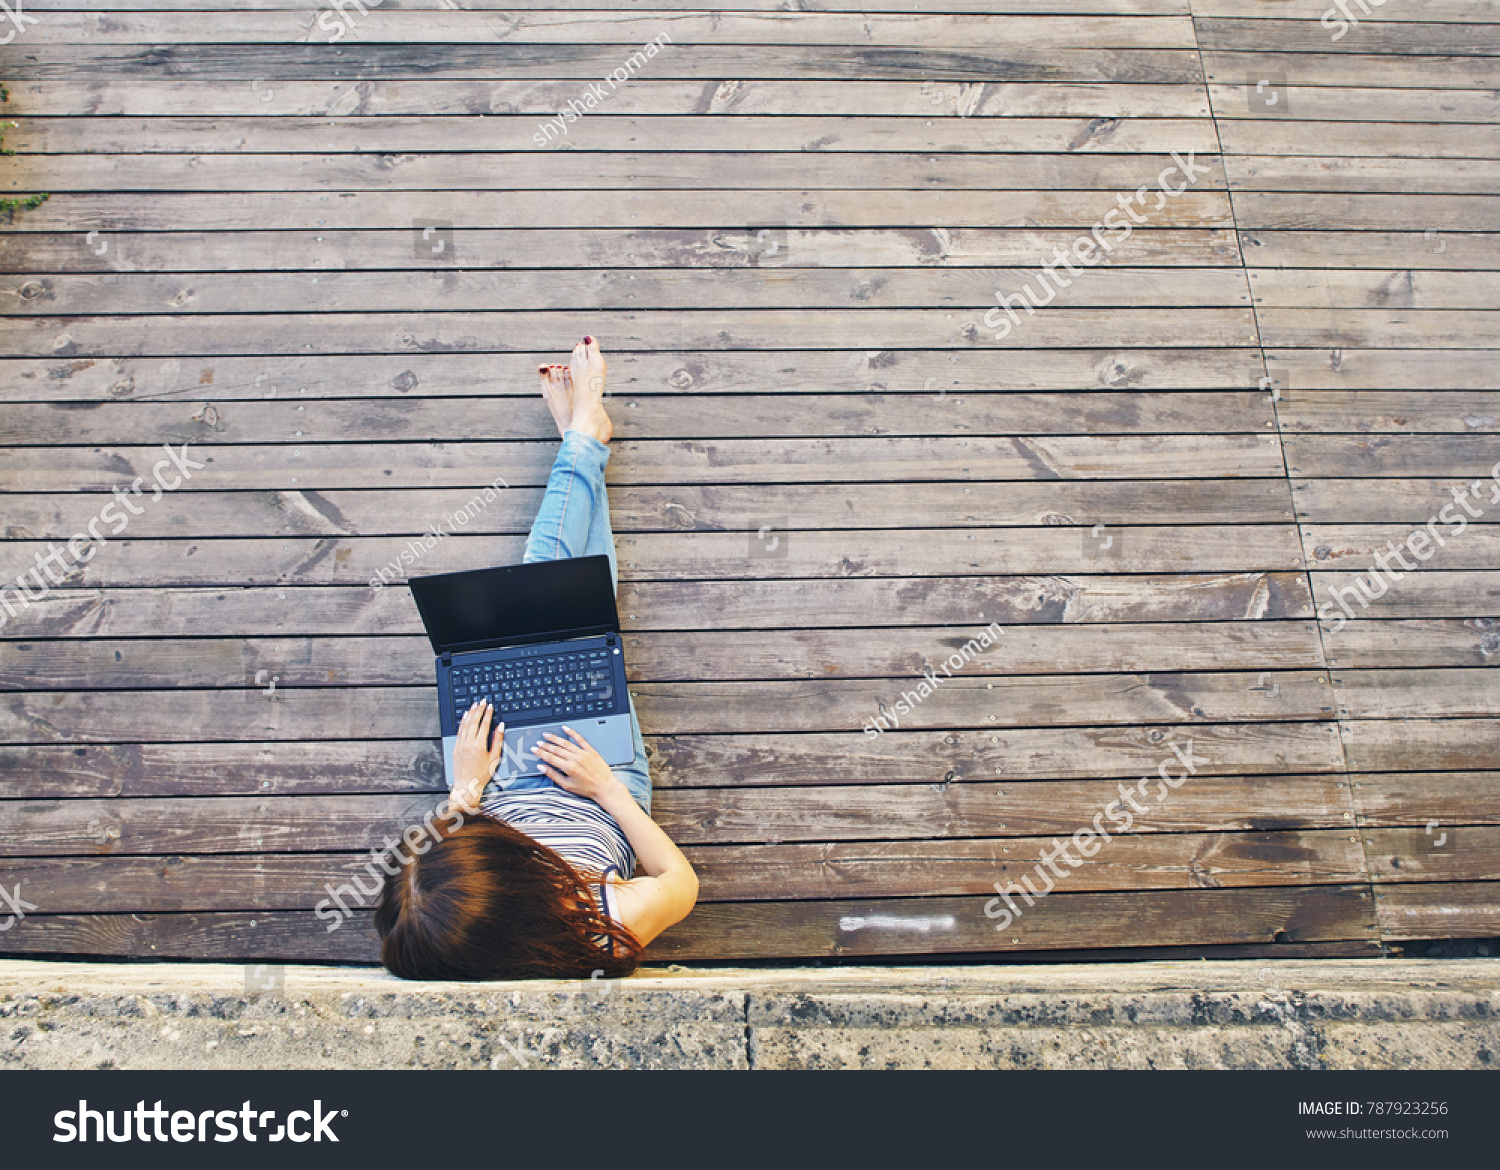 Portrait of a happy young woman sitting on the city wooden surface and using laptop computer outdoors #787923256